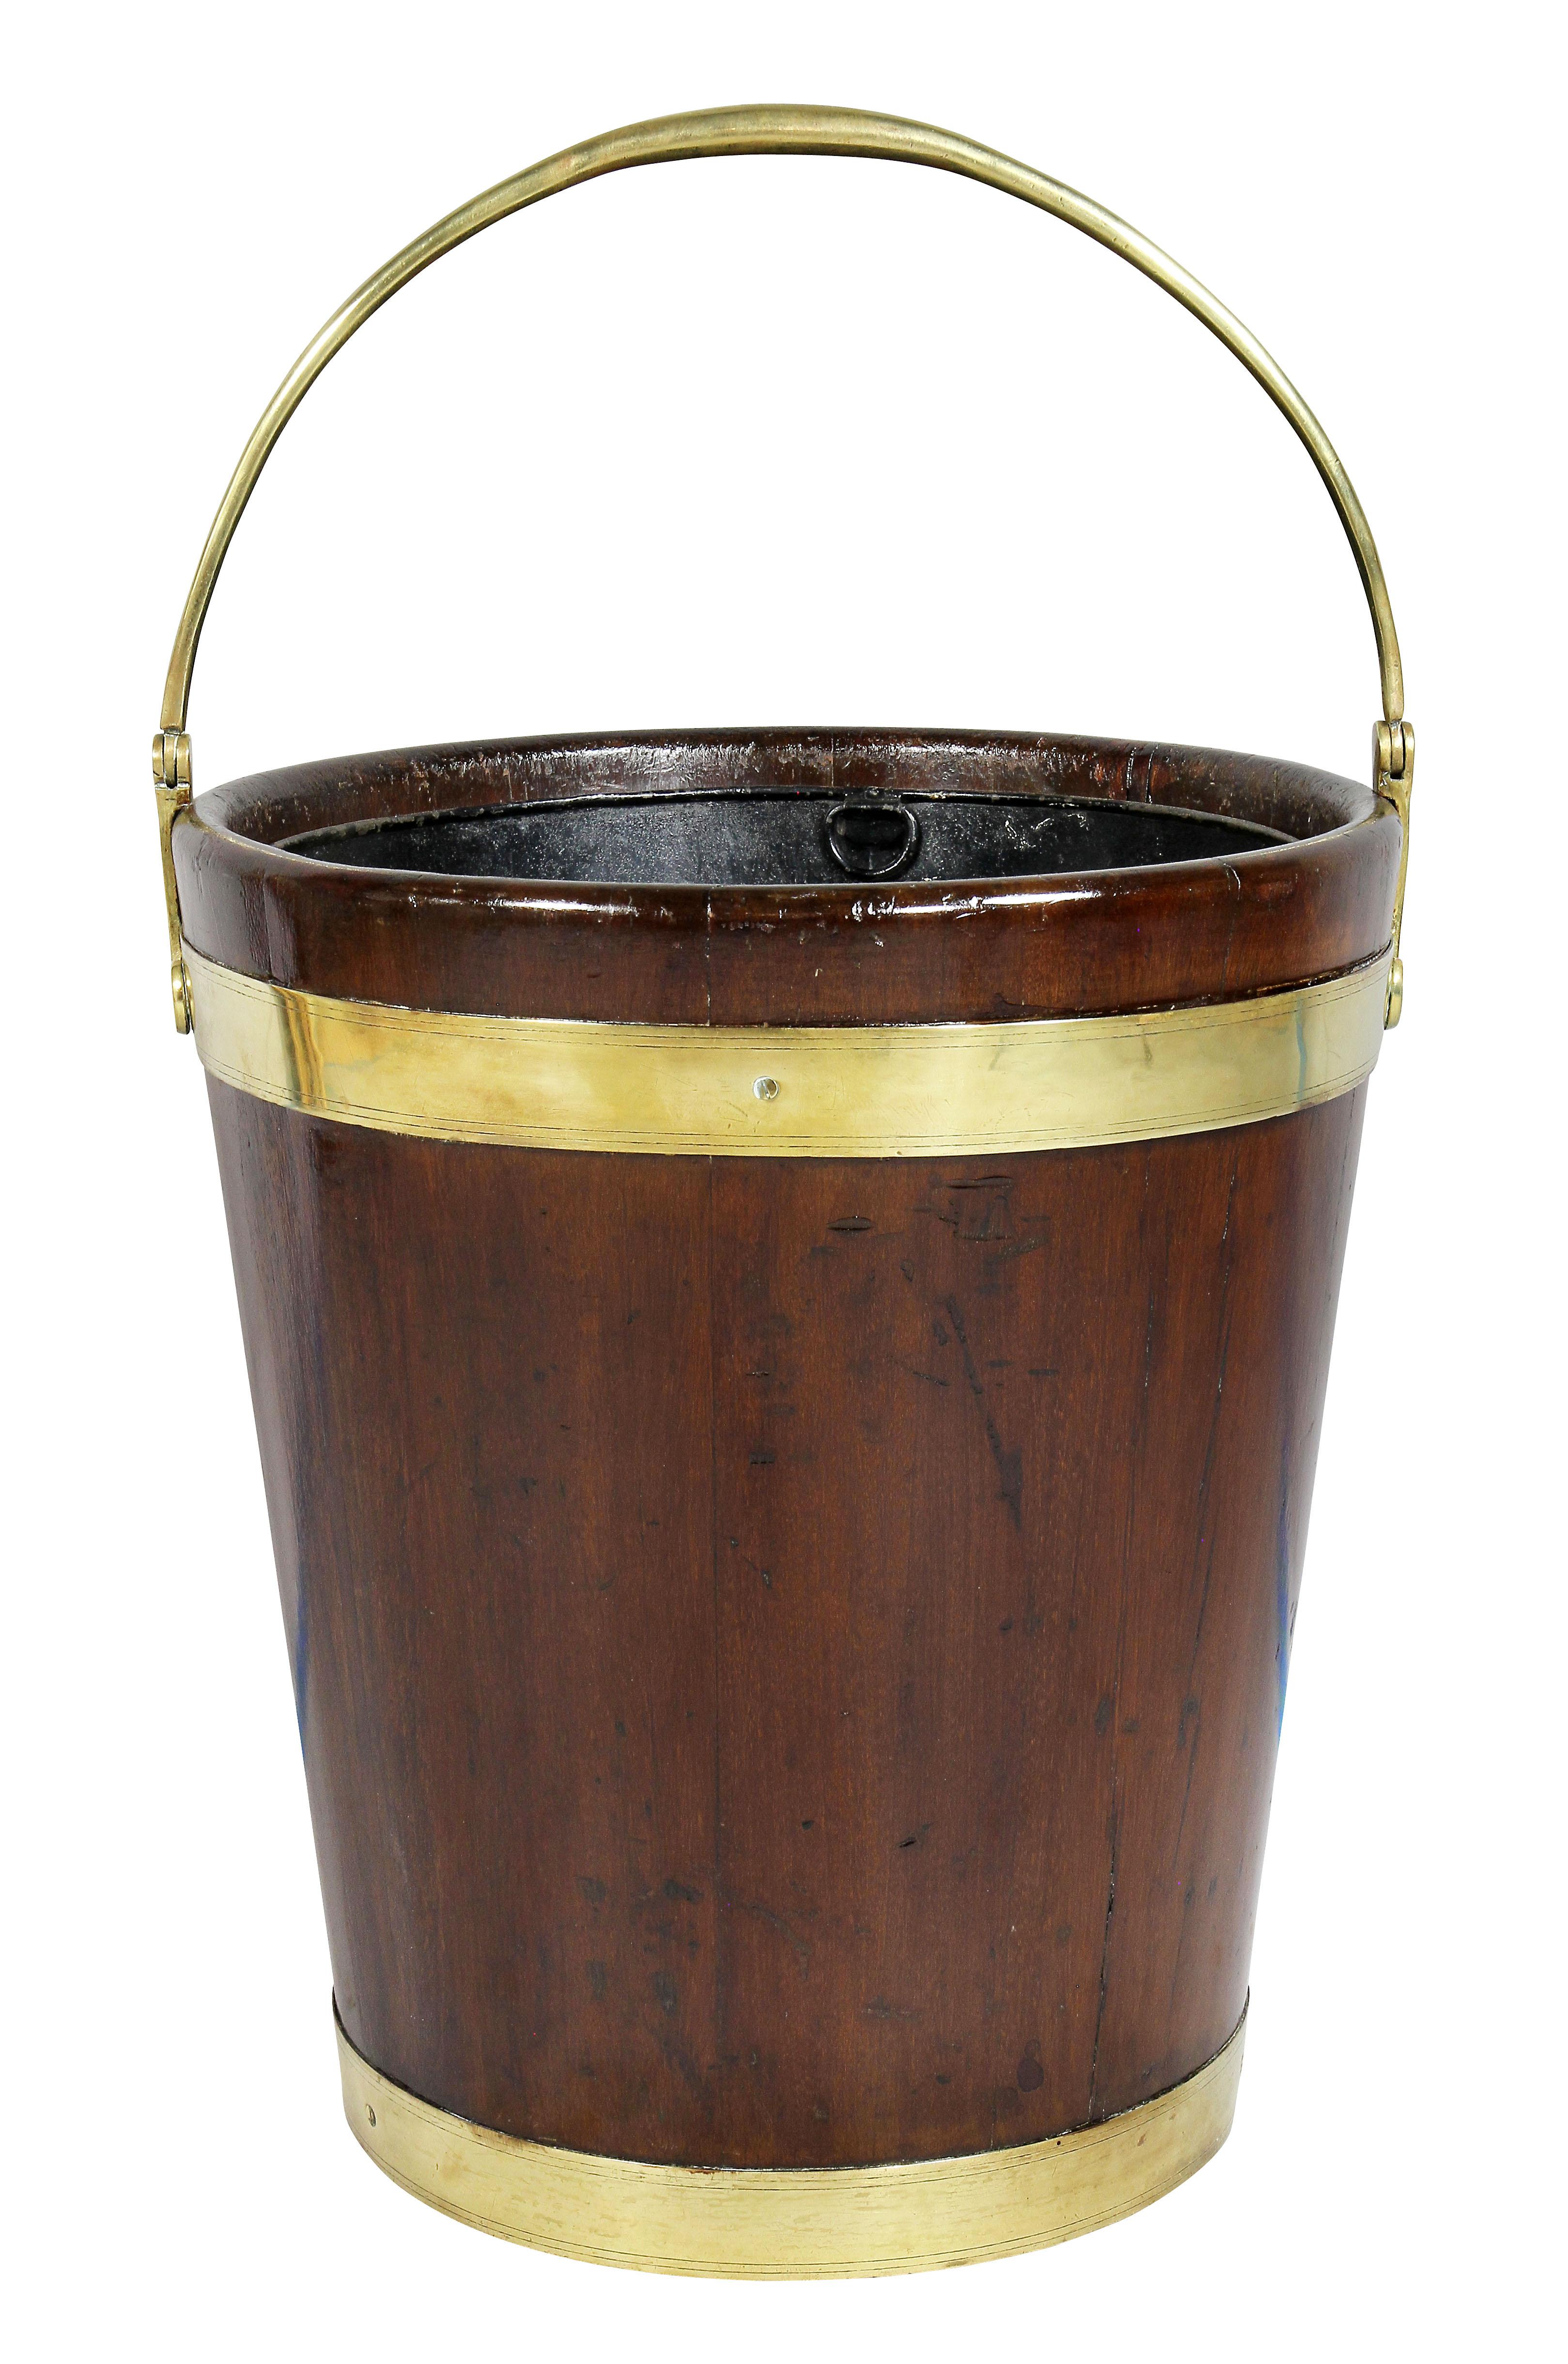 With brass loop handle, tin liner and tapered cylindrical body with brass strapping.